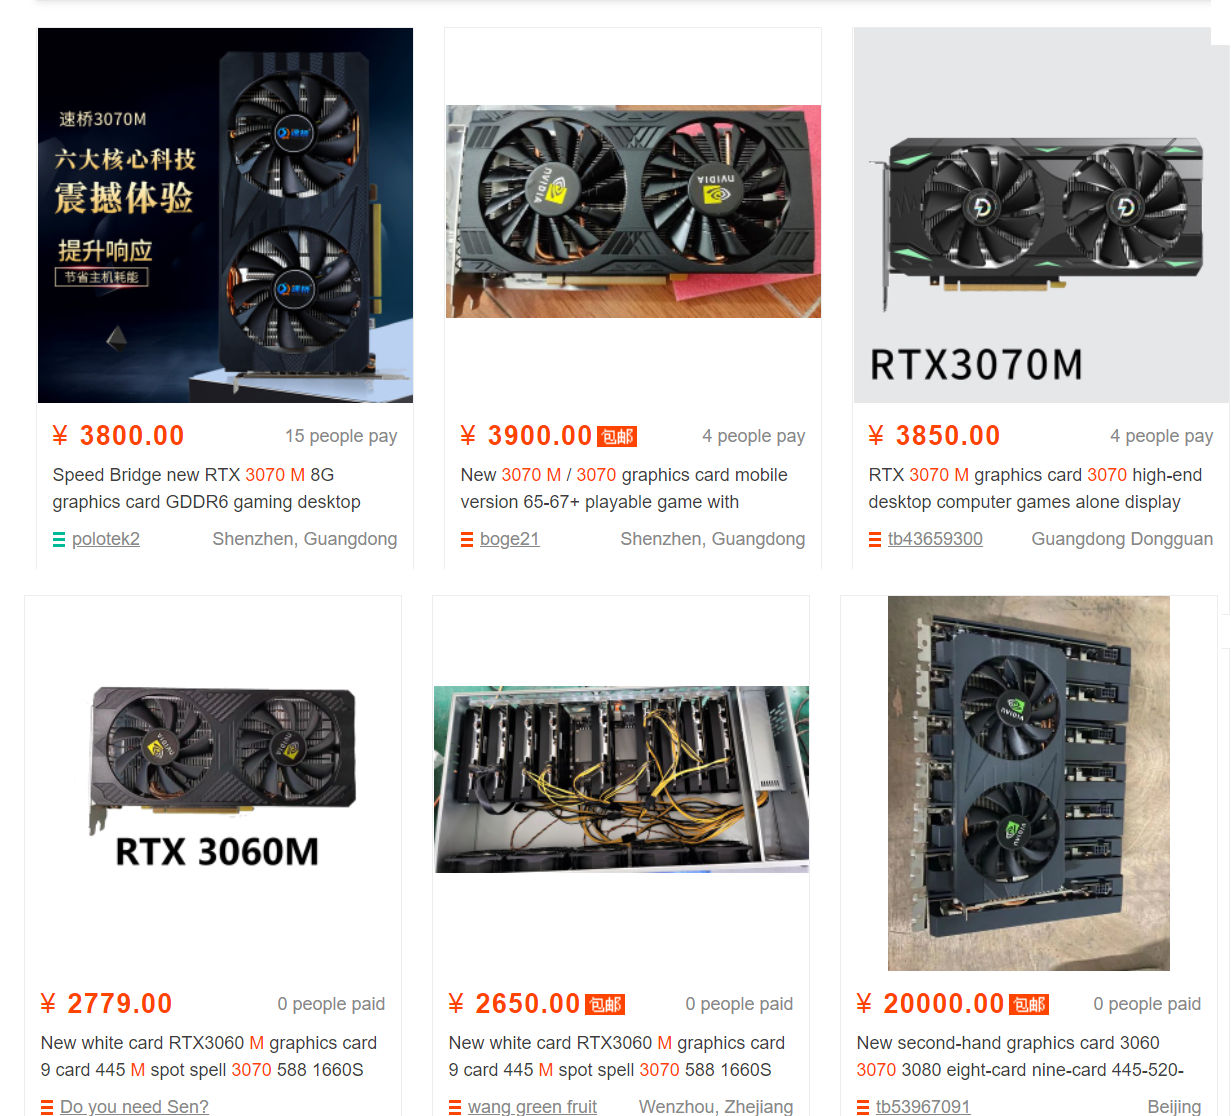 Chinese are still selling GeForce RTX 30 laptop GPUs as desktop mining cards to avoid LHR restrictions - VideoCardz.com